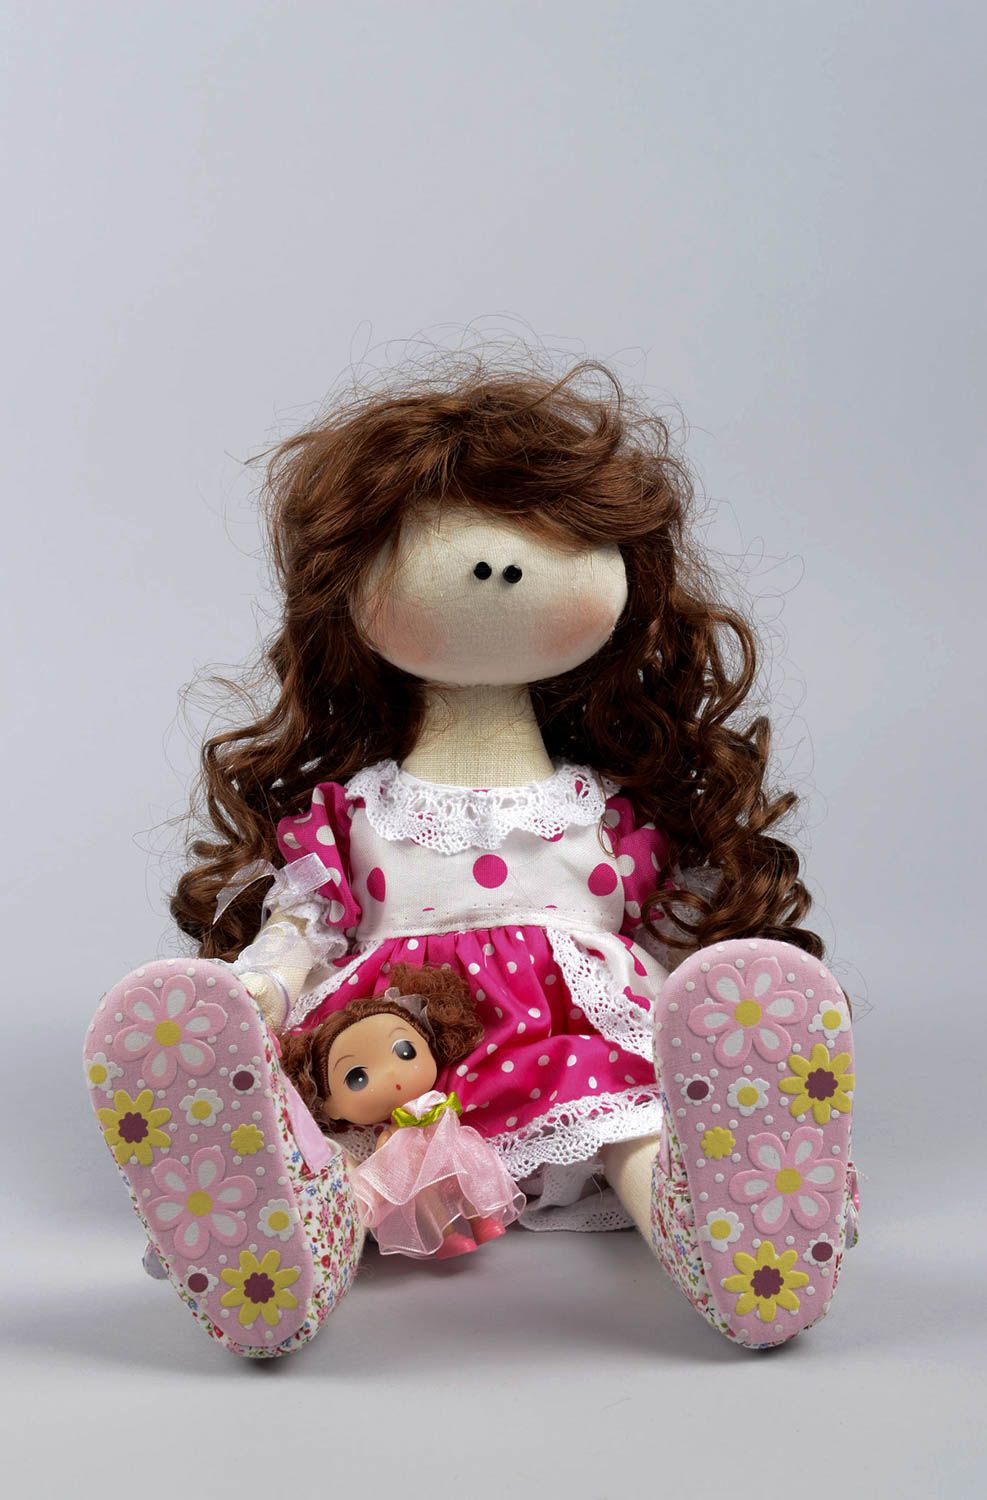 Handmade soft toy cute childrens toys rag doll for girls gift ideas for kids photo 4